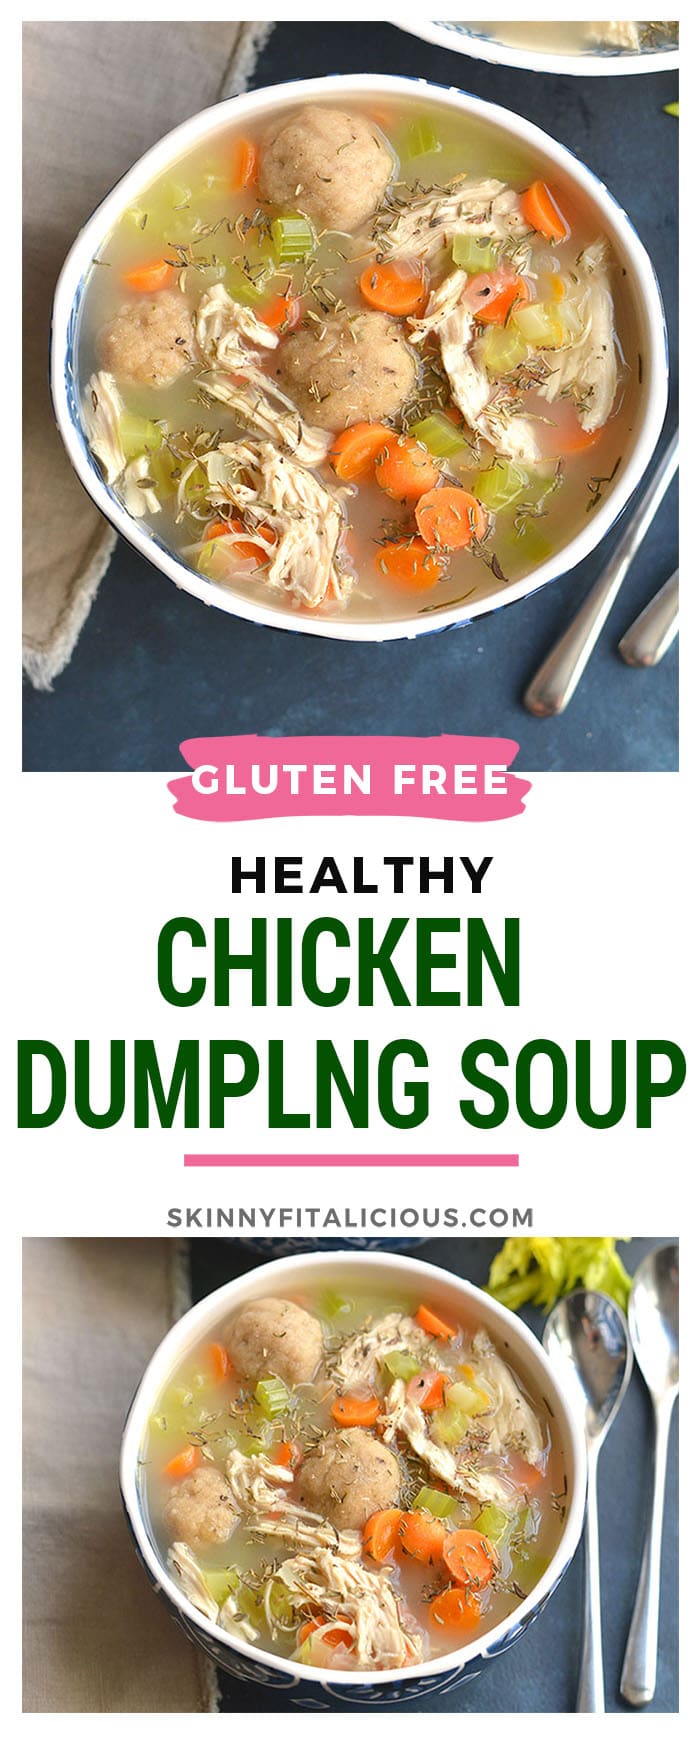 Healthy Chicken Dumpling Soup! Gluten Free dumplings snuggled in a warm bowl of chicken soup. Cozy, comforting, loaded with veggies & flavor. A quick & easy meal to feed the soul. Gluten Free + Low Calorie